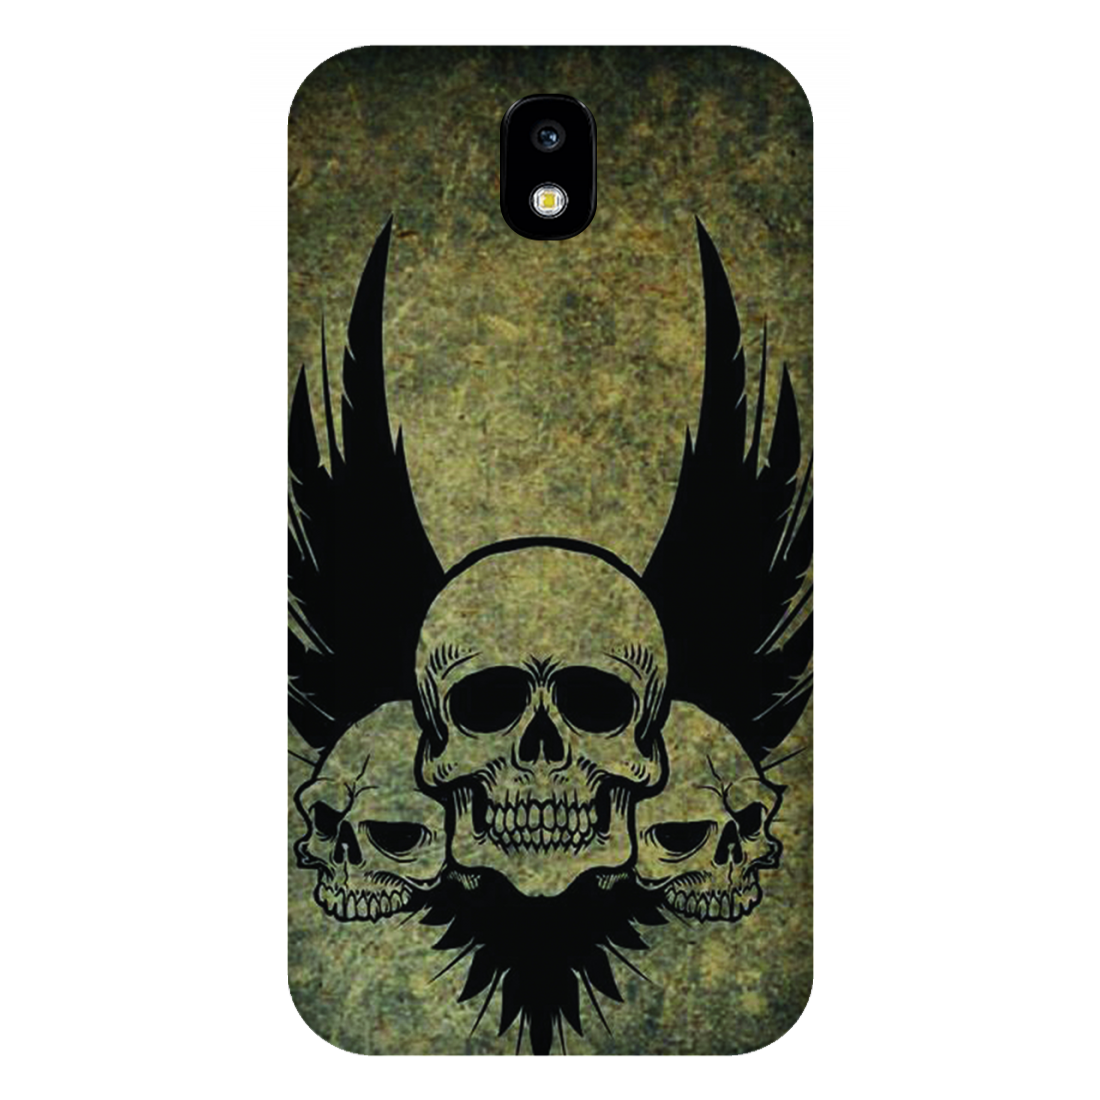 Menacing Skulls with Dark Wings on a Grungy Background Case Samsung Galaxy J7 Pro